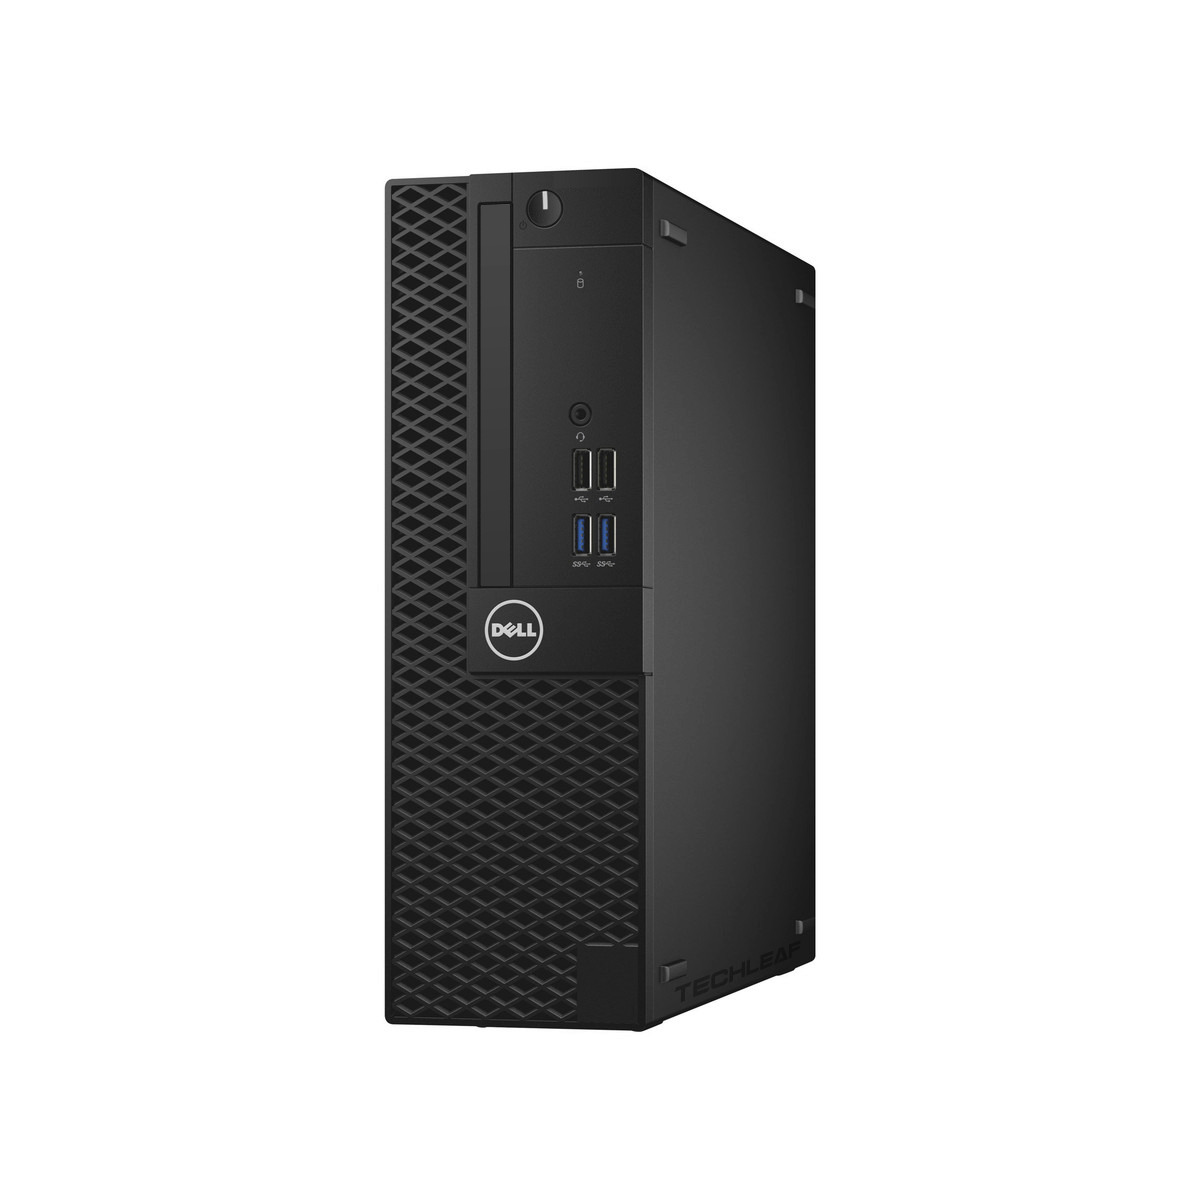 Dell Desktop Computer PC i5-8500, up to 64GB RAM, 4TB SSD, Windows 11 or 10 WiFi